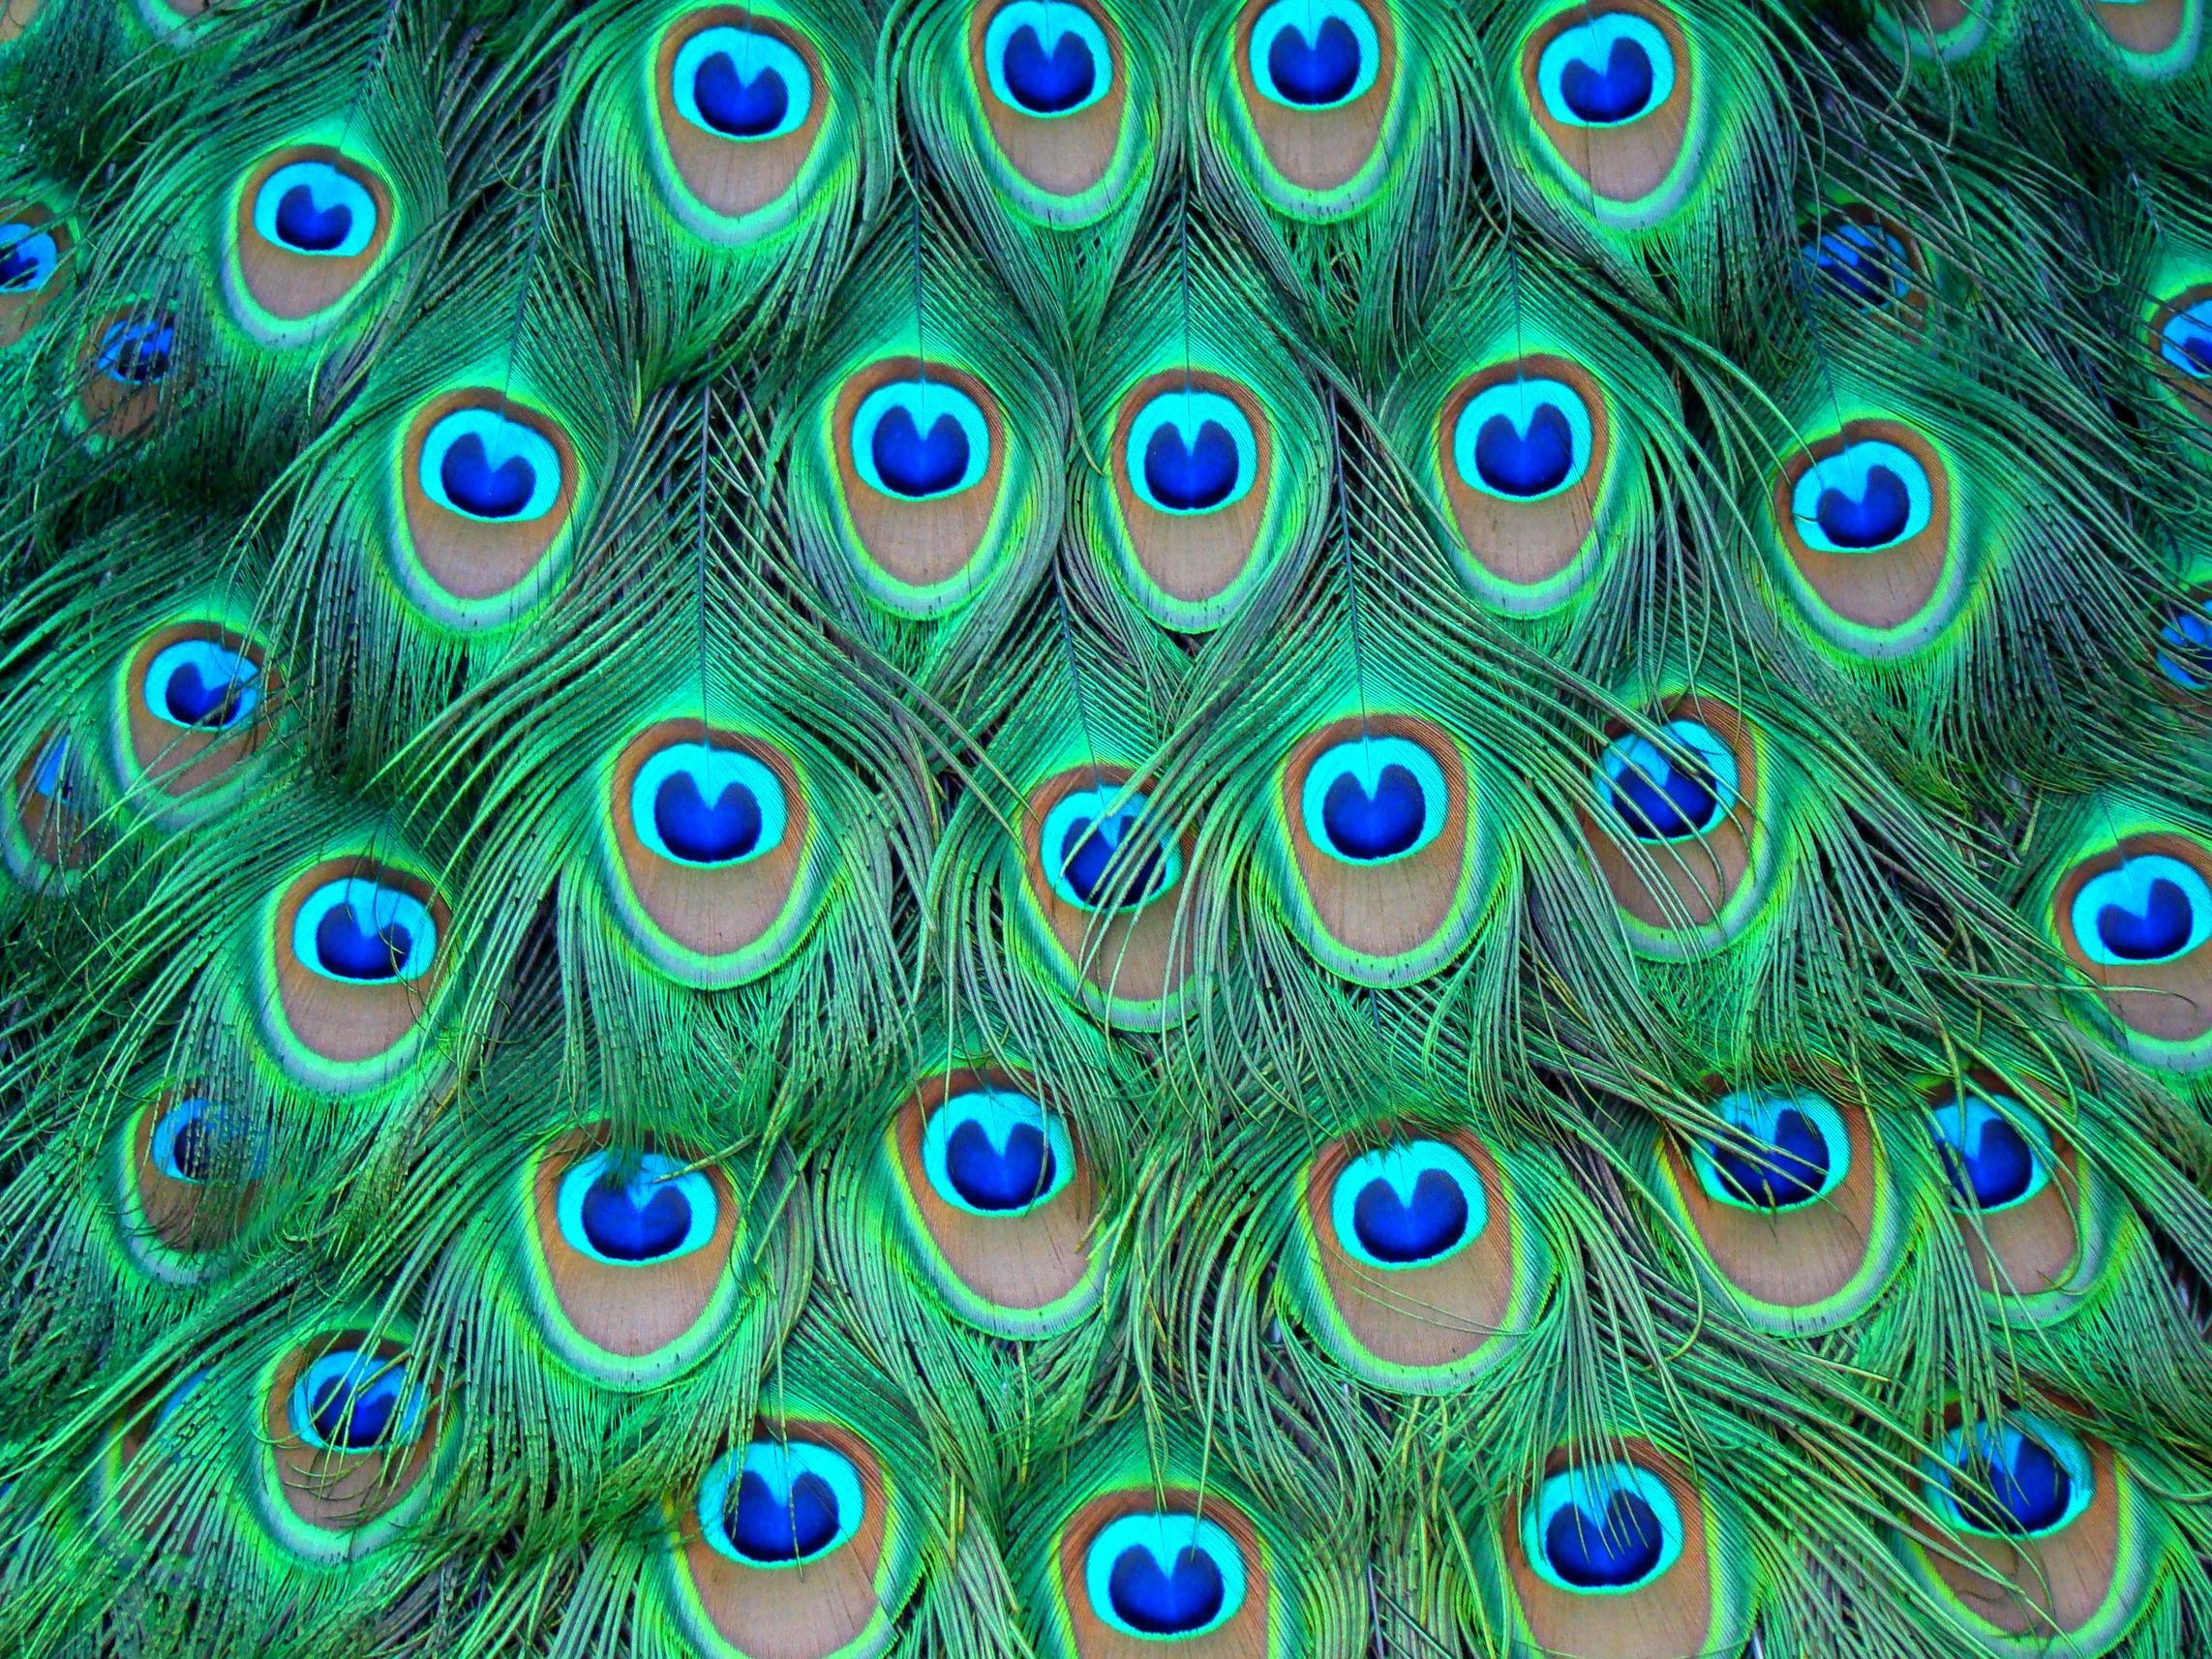 Peacock Feather Wallpaper, Live Peacock Feather Wallpaper